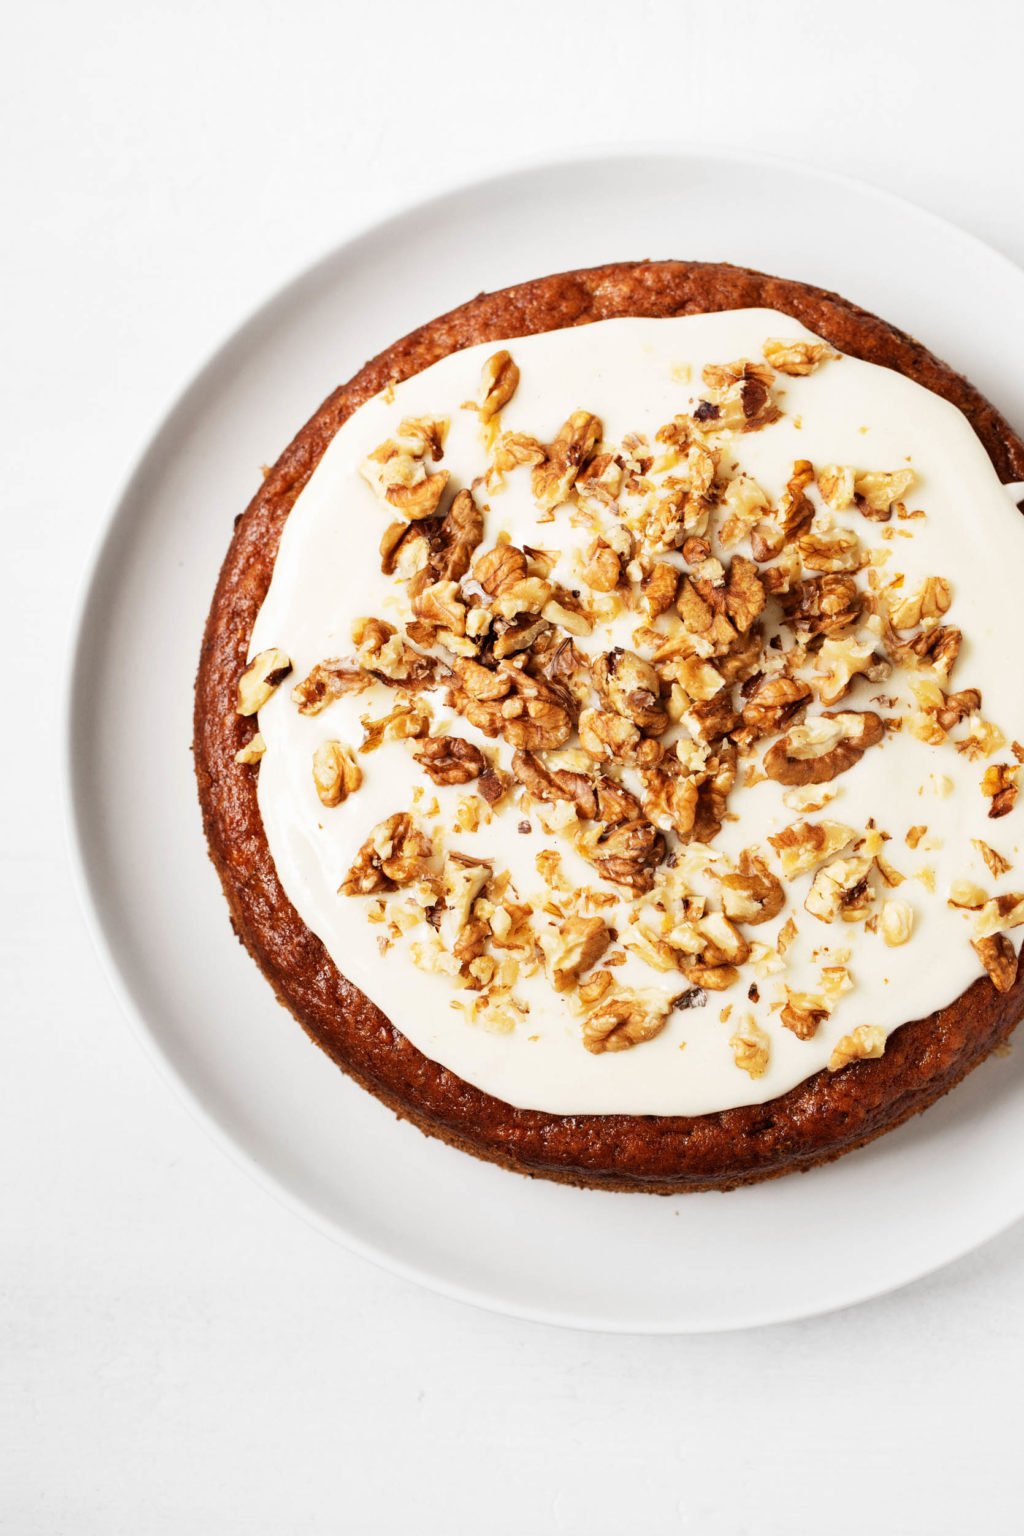 An overhead shot of a round, frosted cake with chopped walnuts.